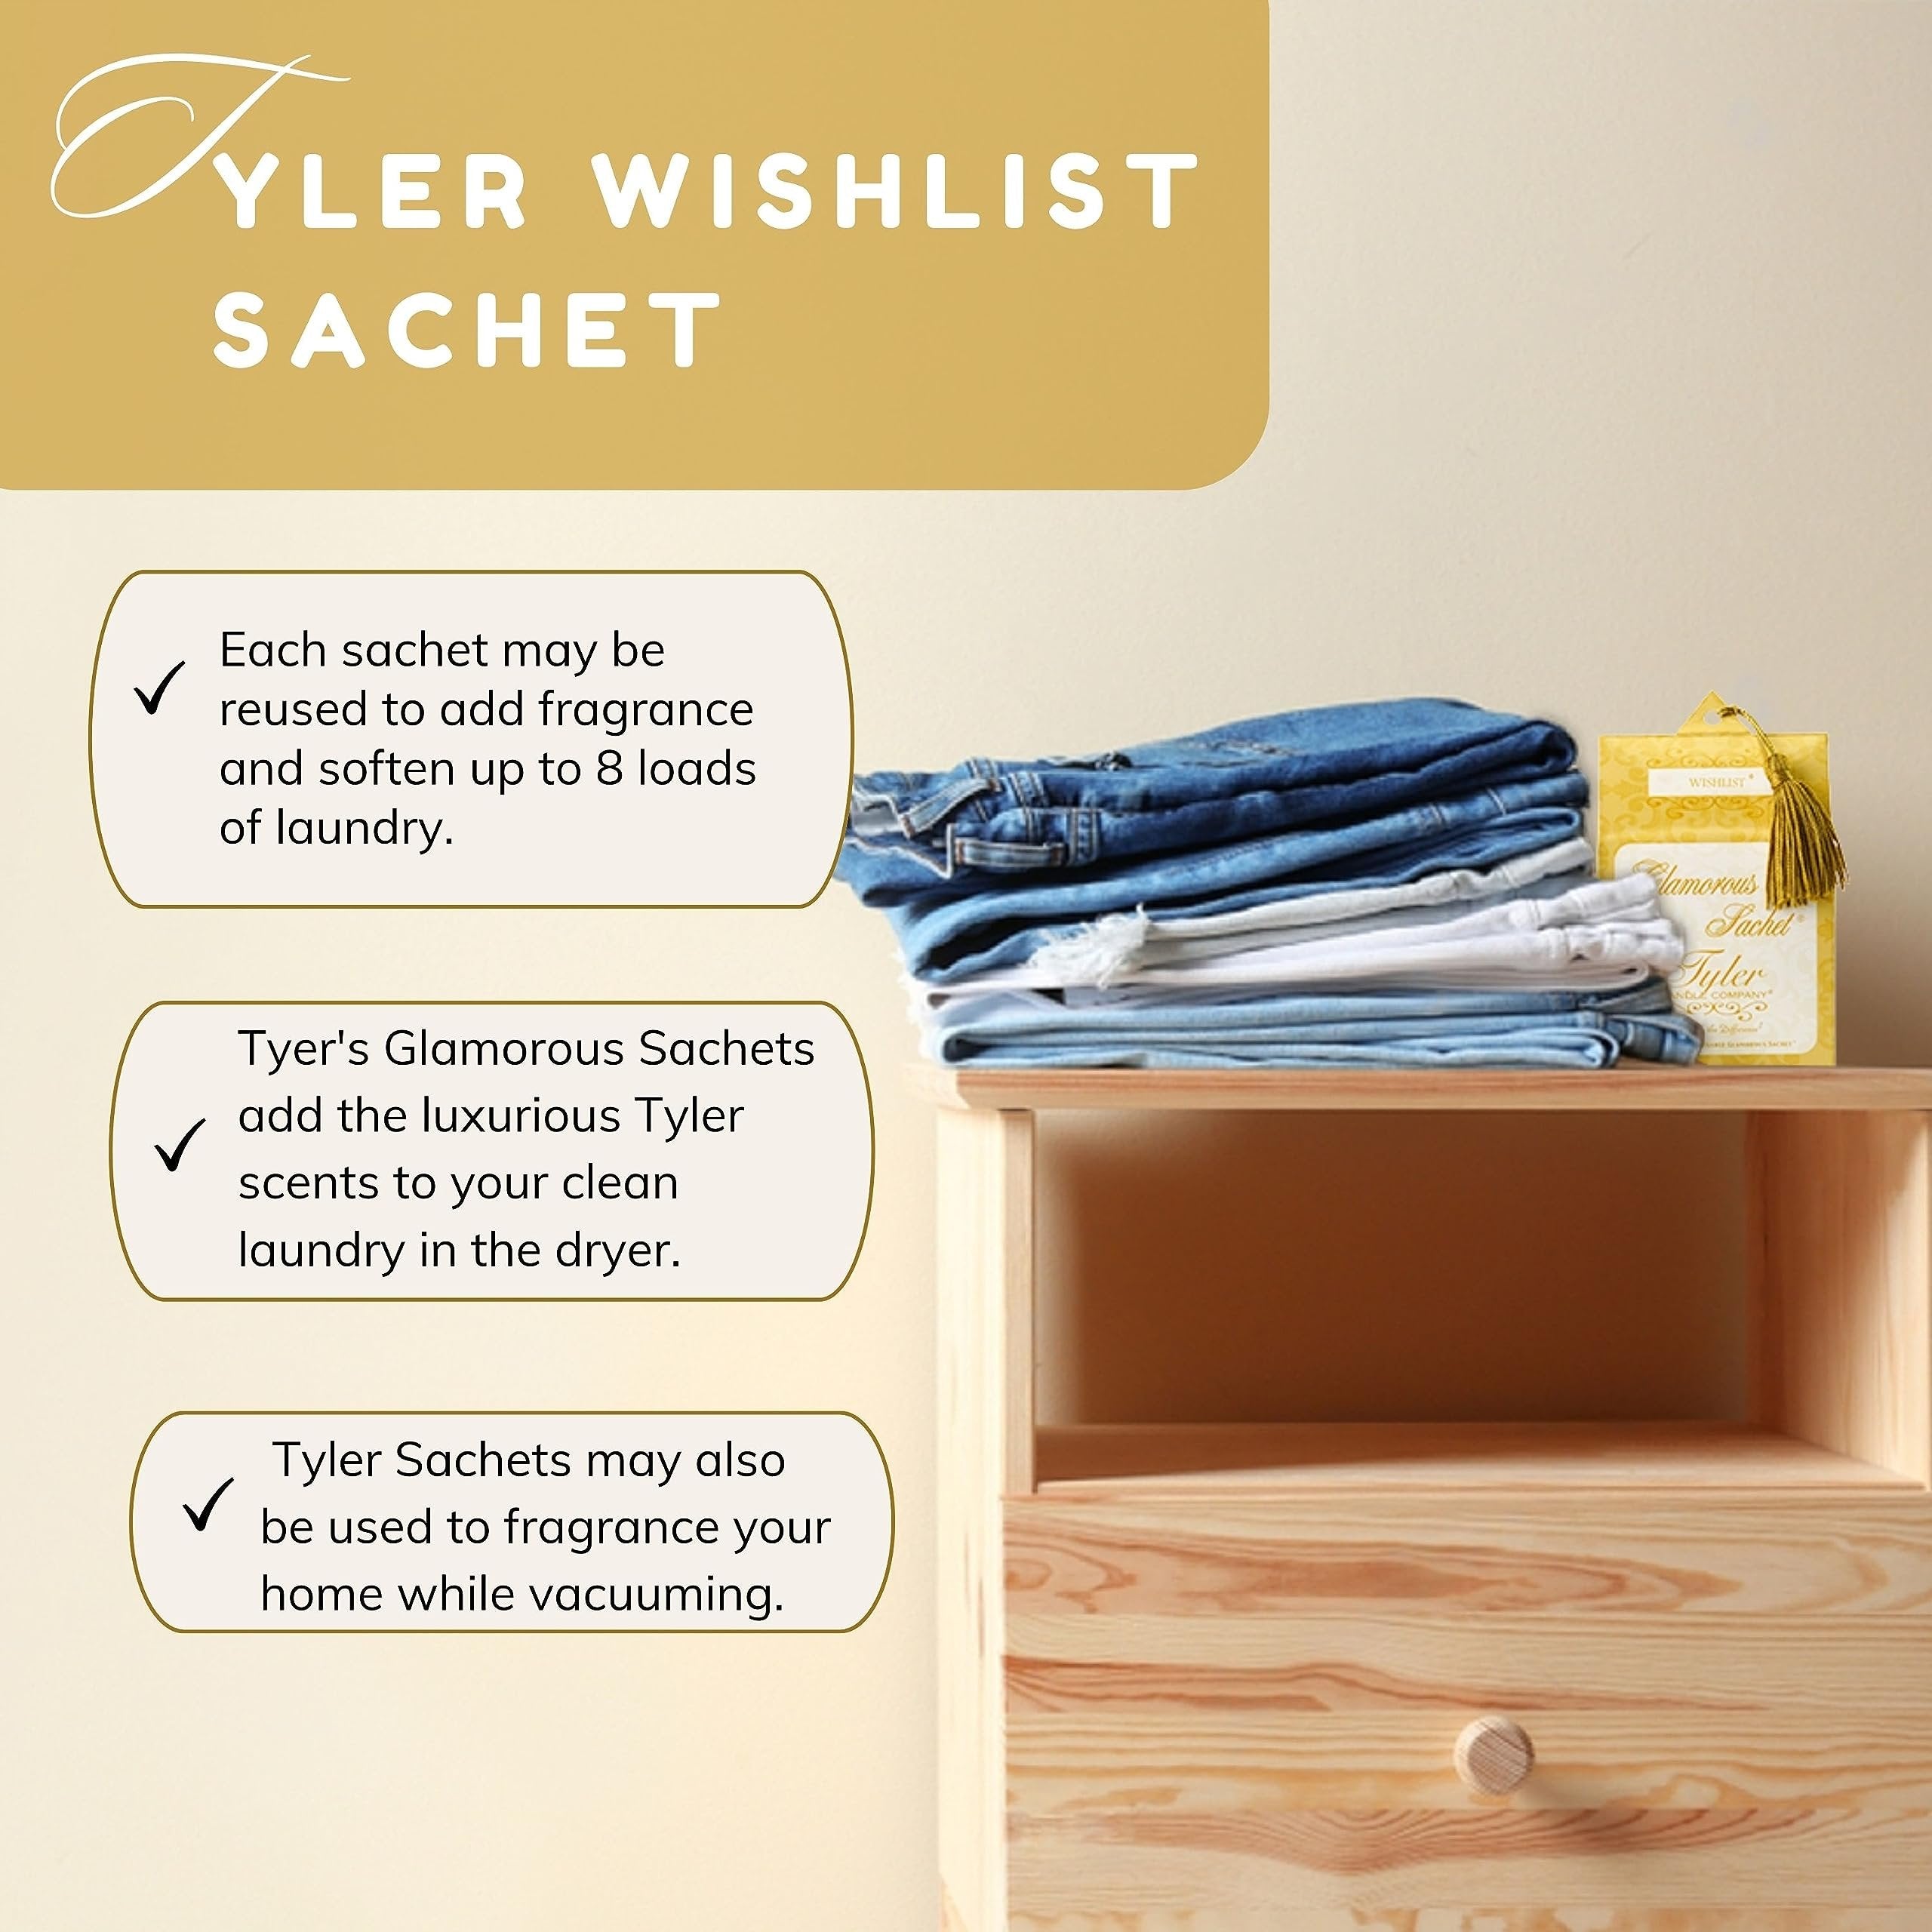 Tyler Wishlist Dryer Sheet Sachets - Glamorous Reusable Dryer Sheets - Sachets for Drawers and Closet Refresher - 1 Pack, 4 Sachets and Multi-Purpose Key Chain